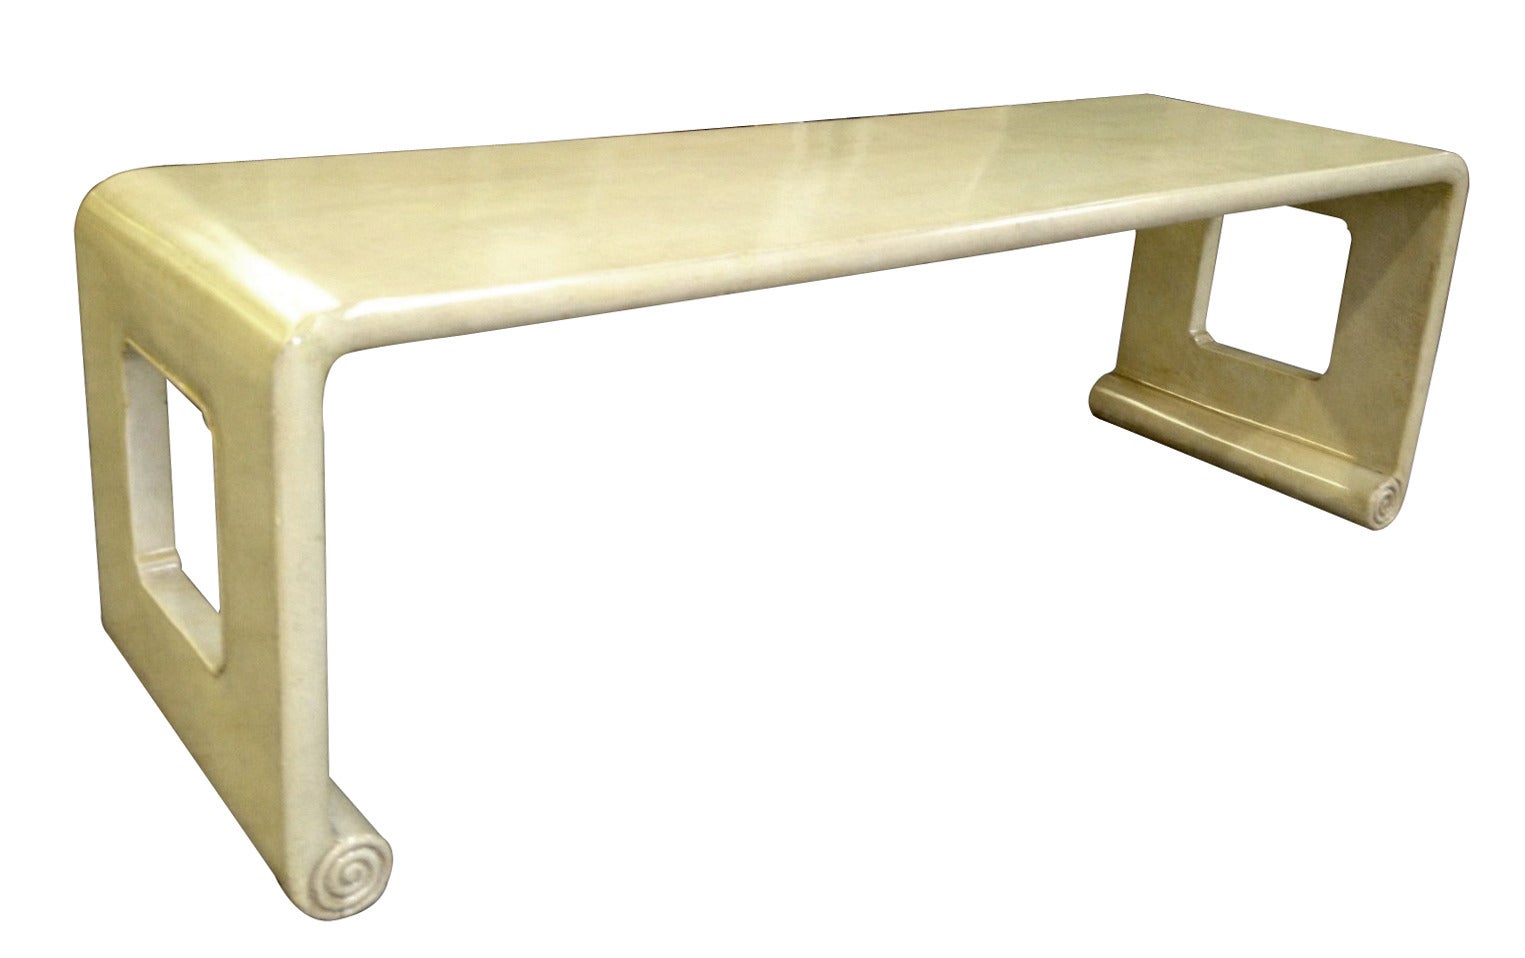 An American Lacquered Parchment Table in the Chinese Taste by Gracie Studios